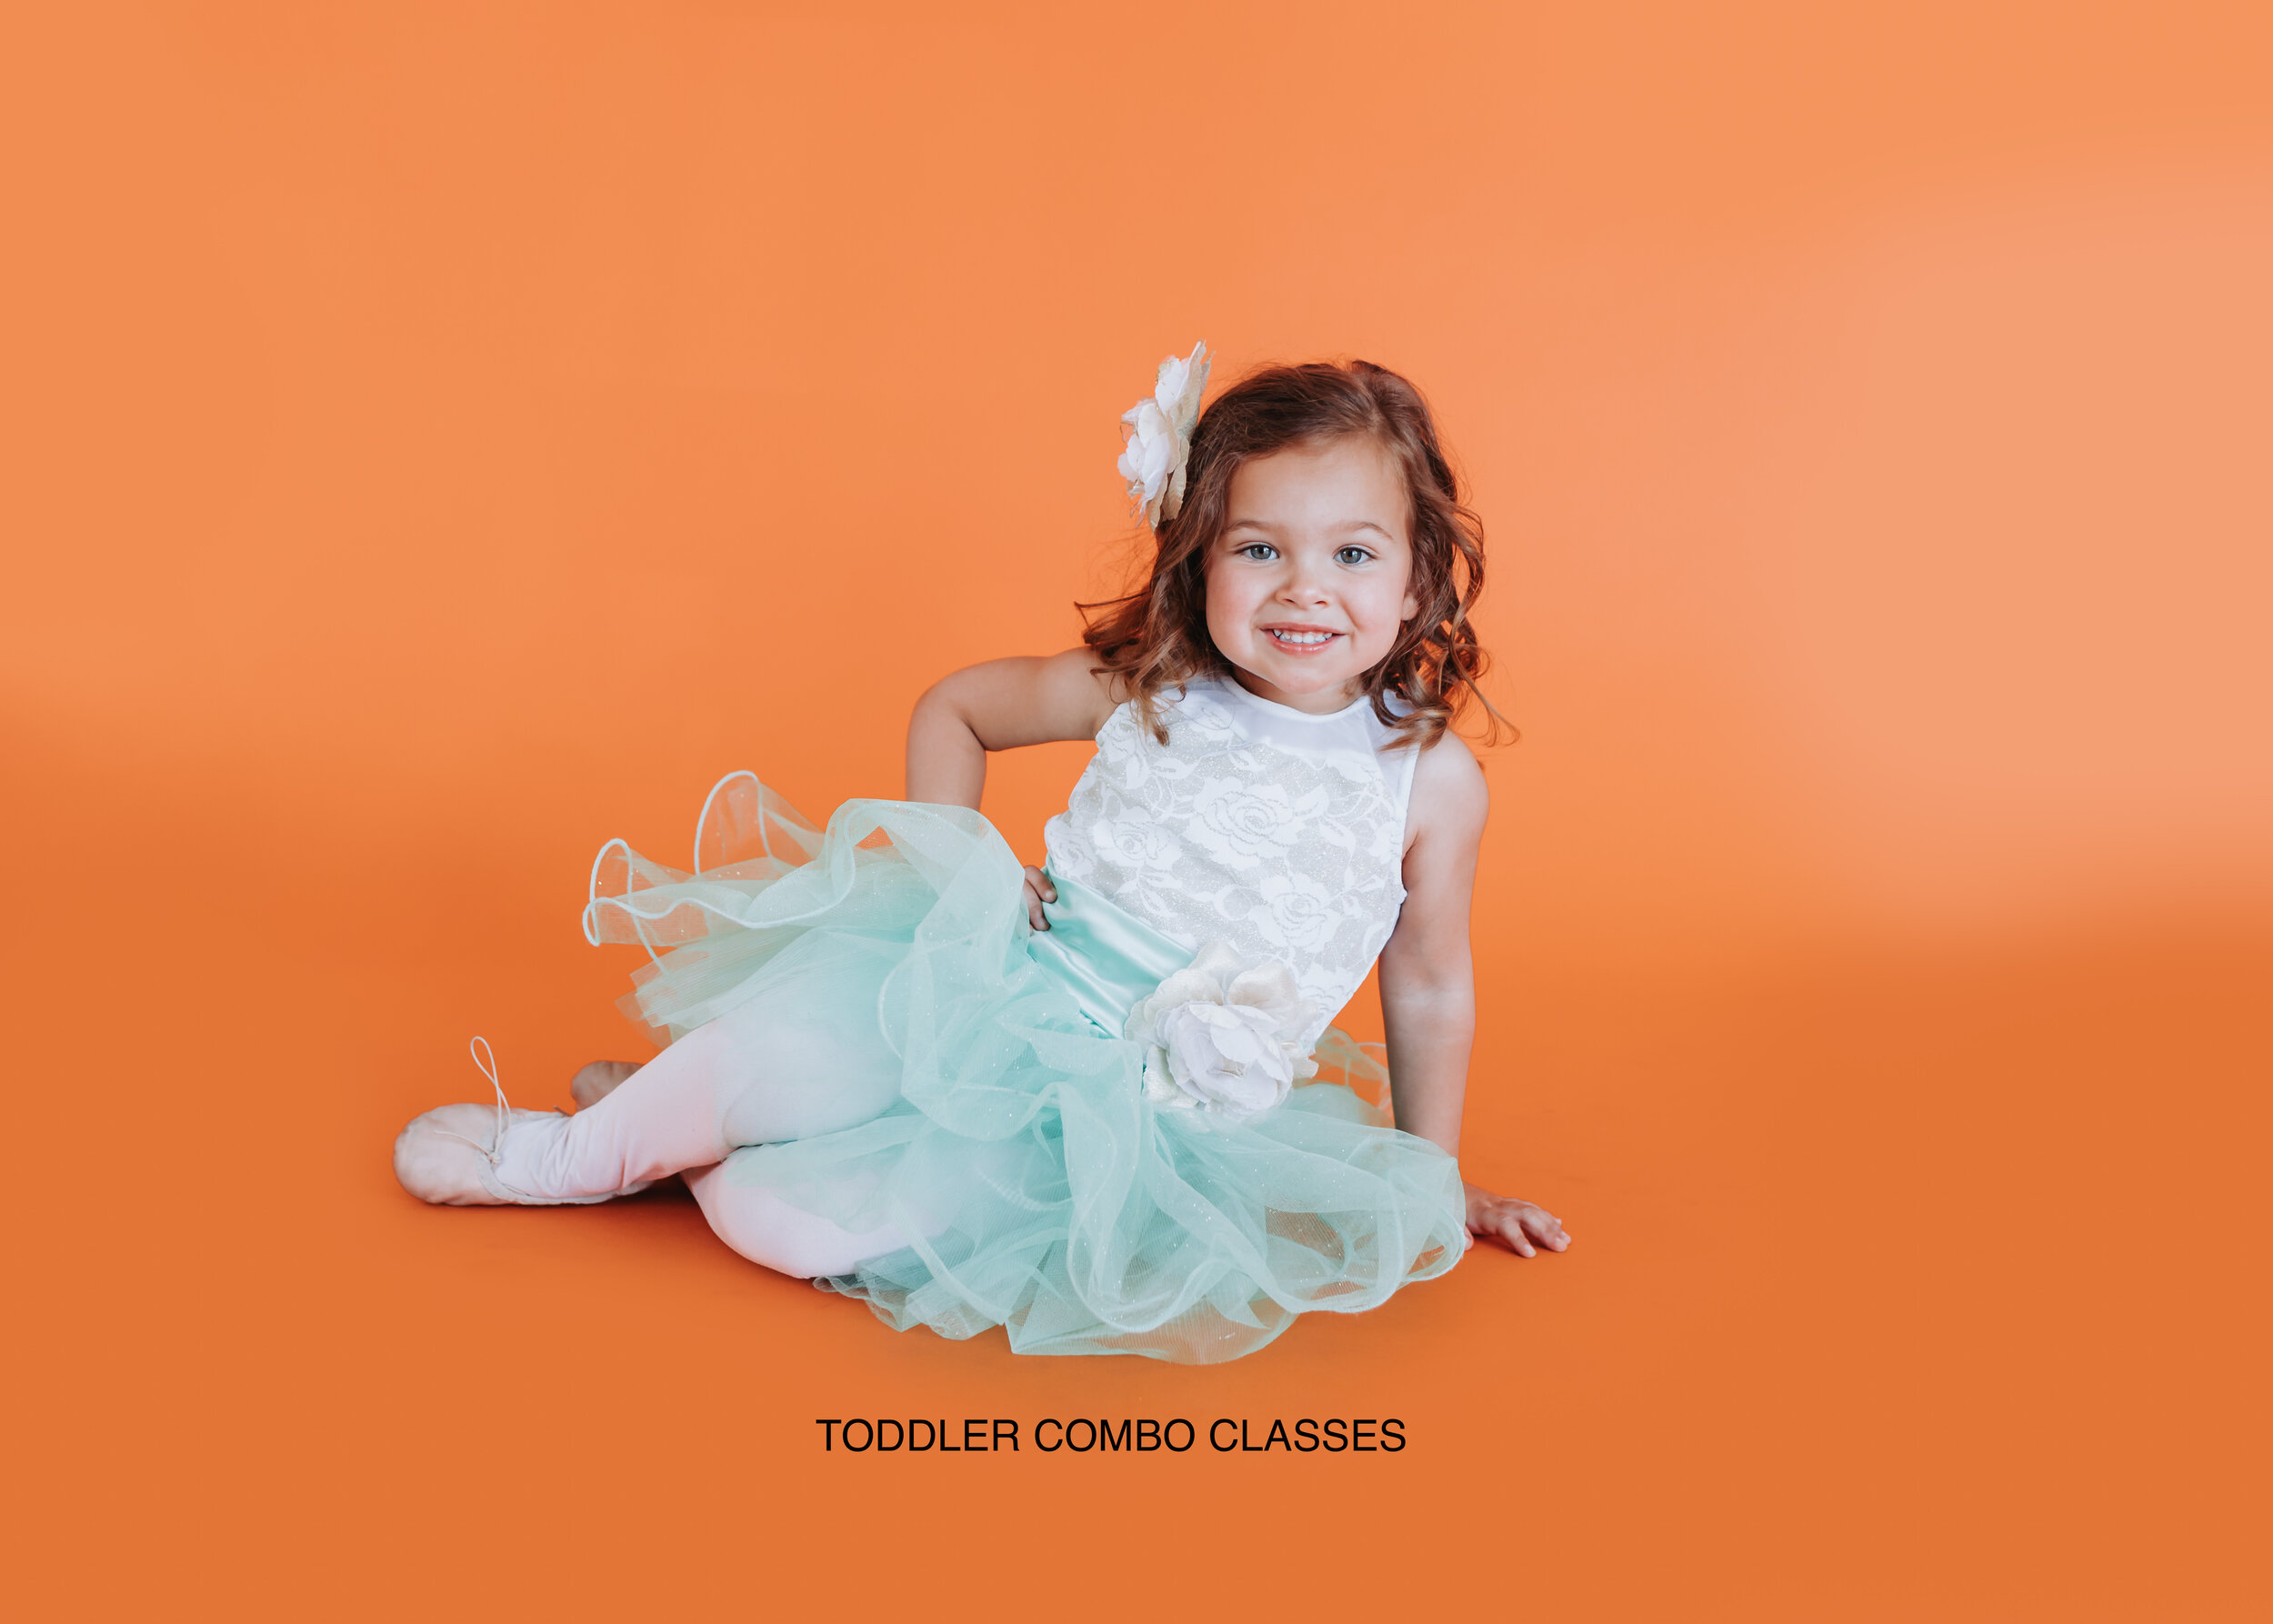 Toddler Combo Classes